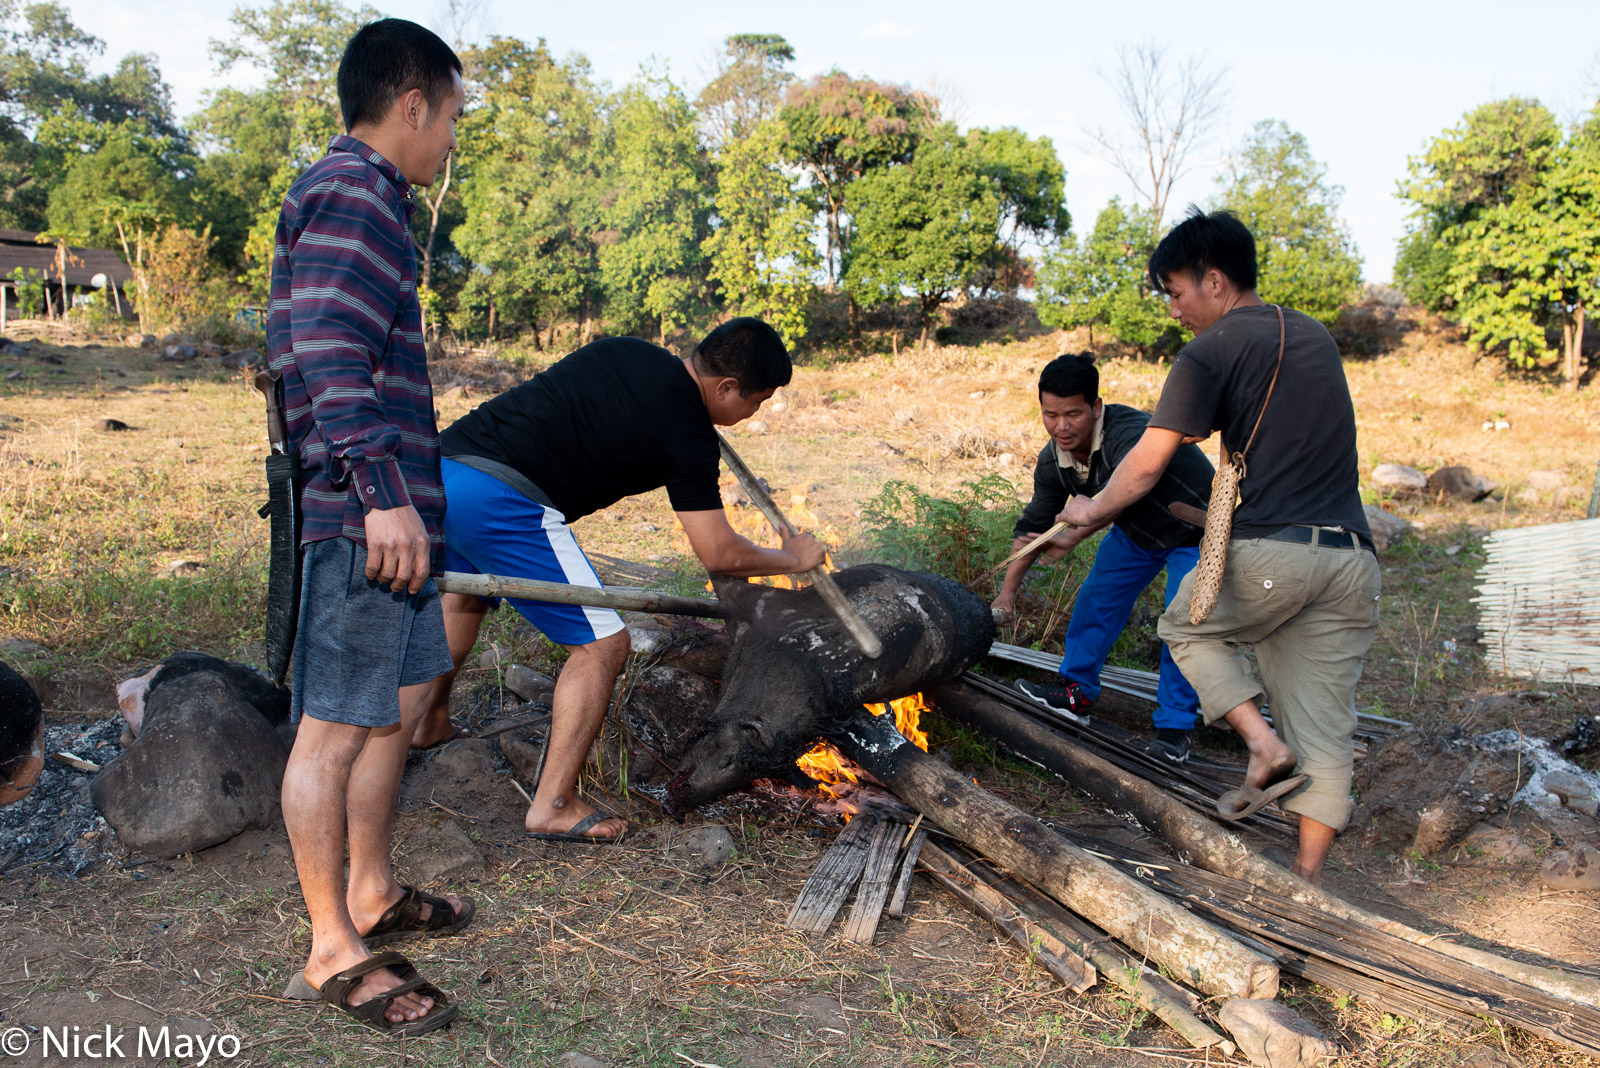 Idu Mishmi men preparing a pig for cooking on an open hearth at the Reh festival in Aohali.